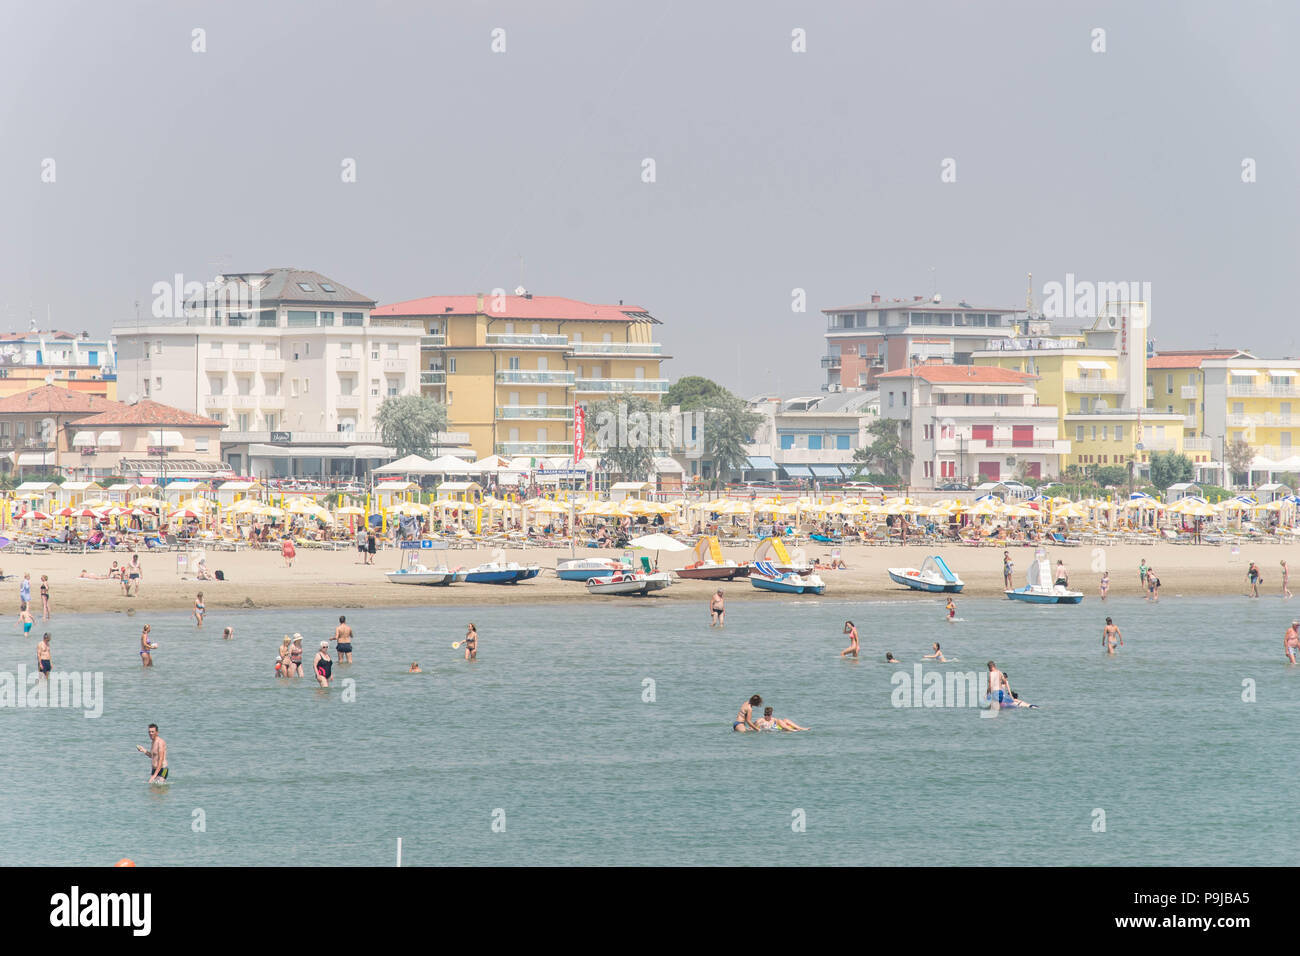 Europe, Italy, Veneto, Caorle. People at the beach, sunbathing and swimming. Relax at the Adriatic Sea coast. Stock Photo